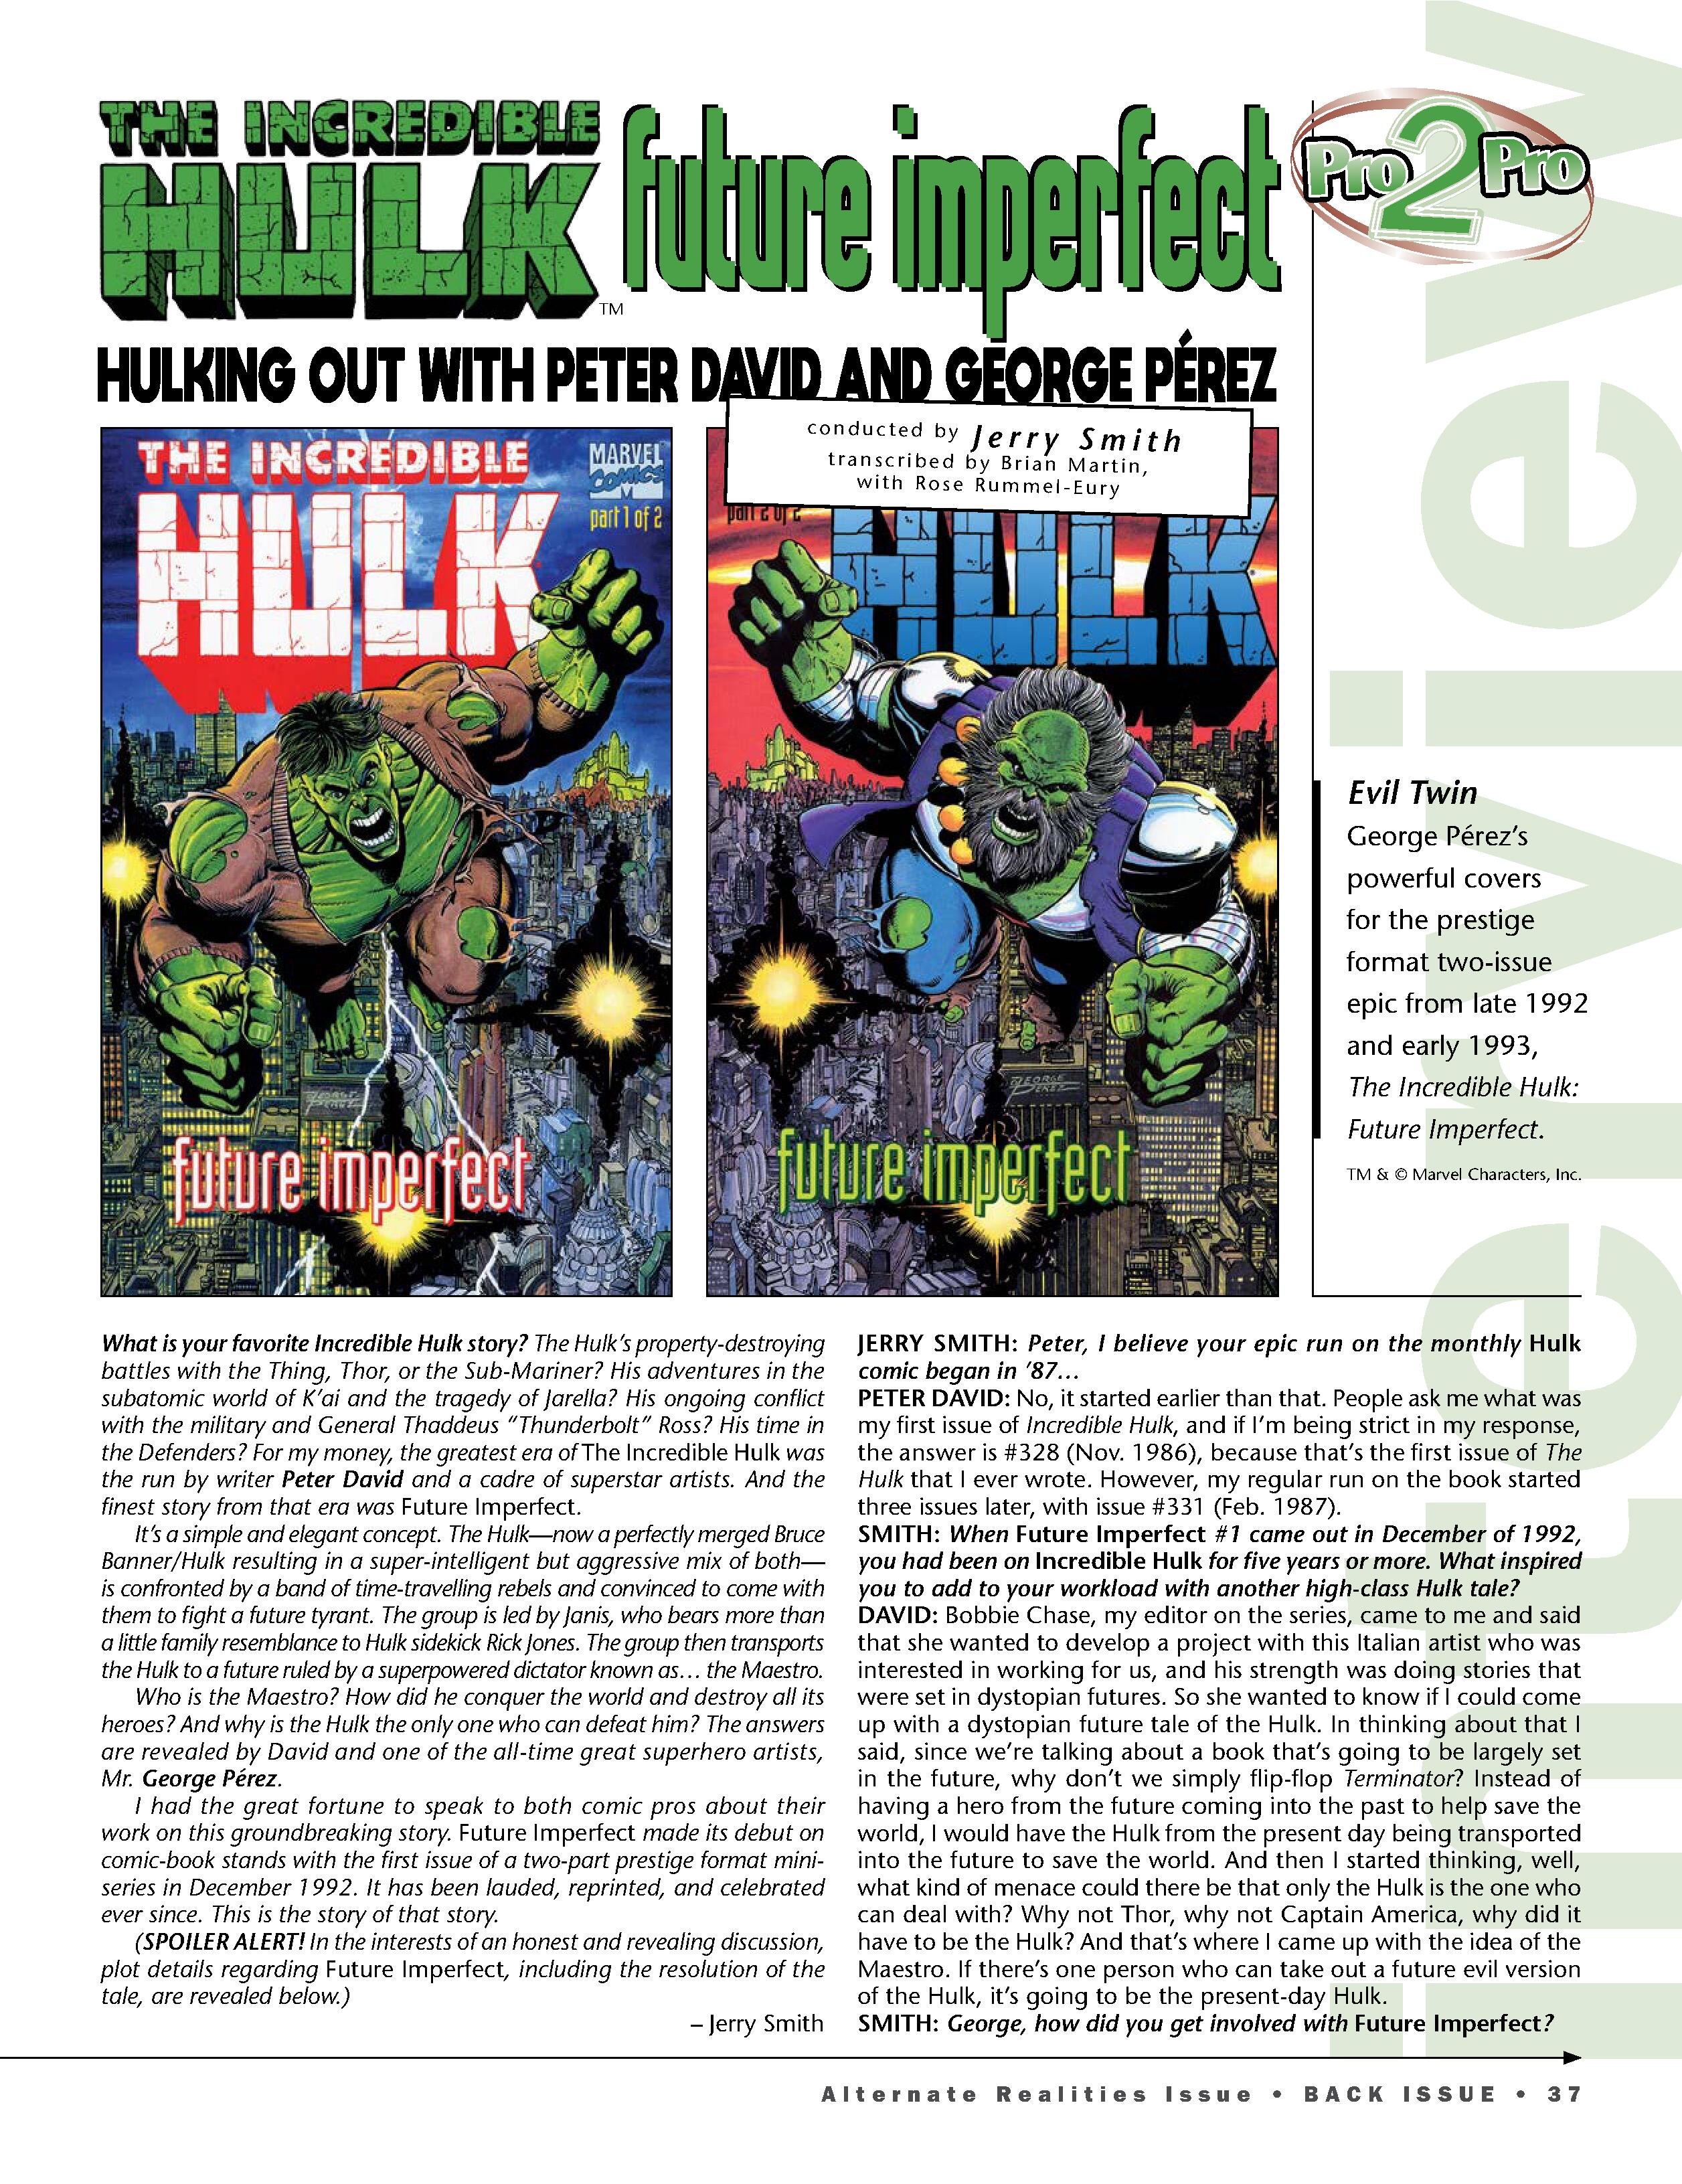 Read online Back Issue comic -  Issue #111 - 39